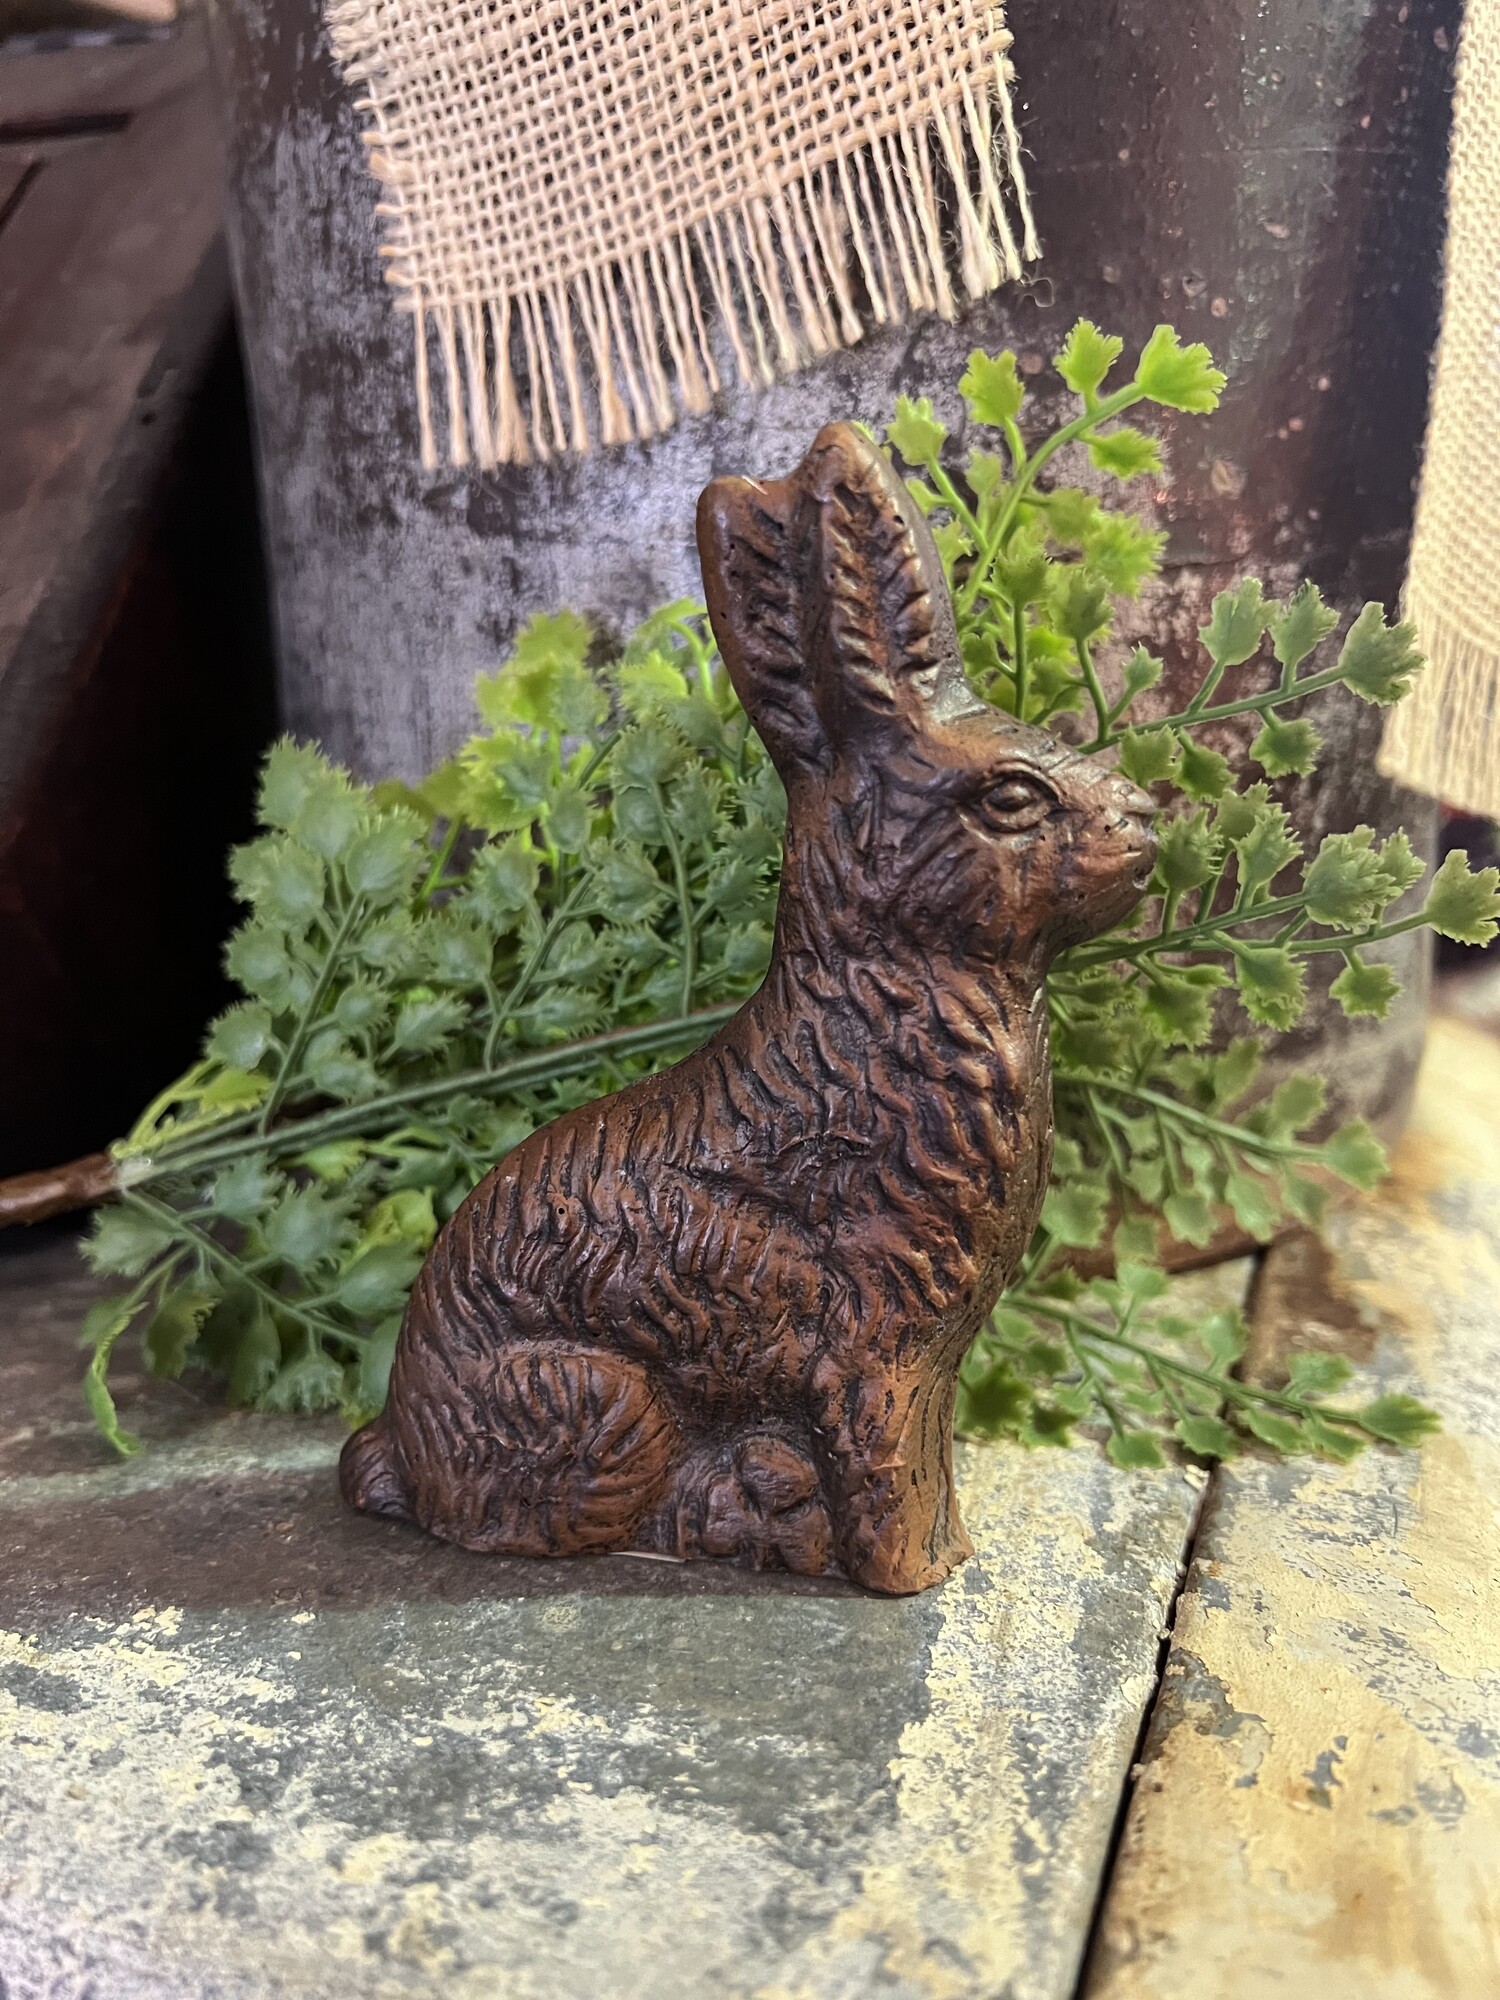 Adorable Chocolate Bunny is the perfect addition to your Easter decor. Bunny is made of resin and is double sided and has the appearance of a real chocolate bunny. Measures 5 inches in height